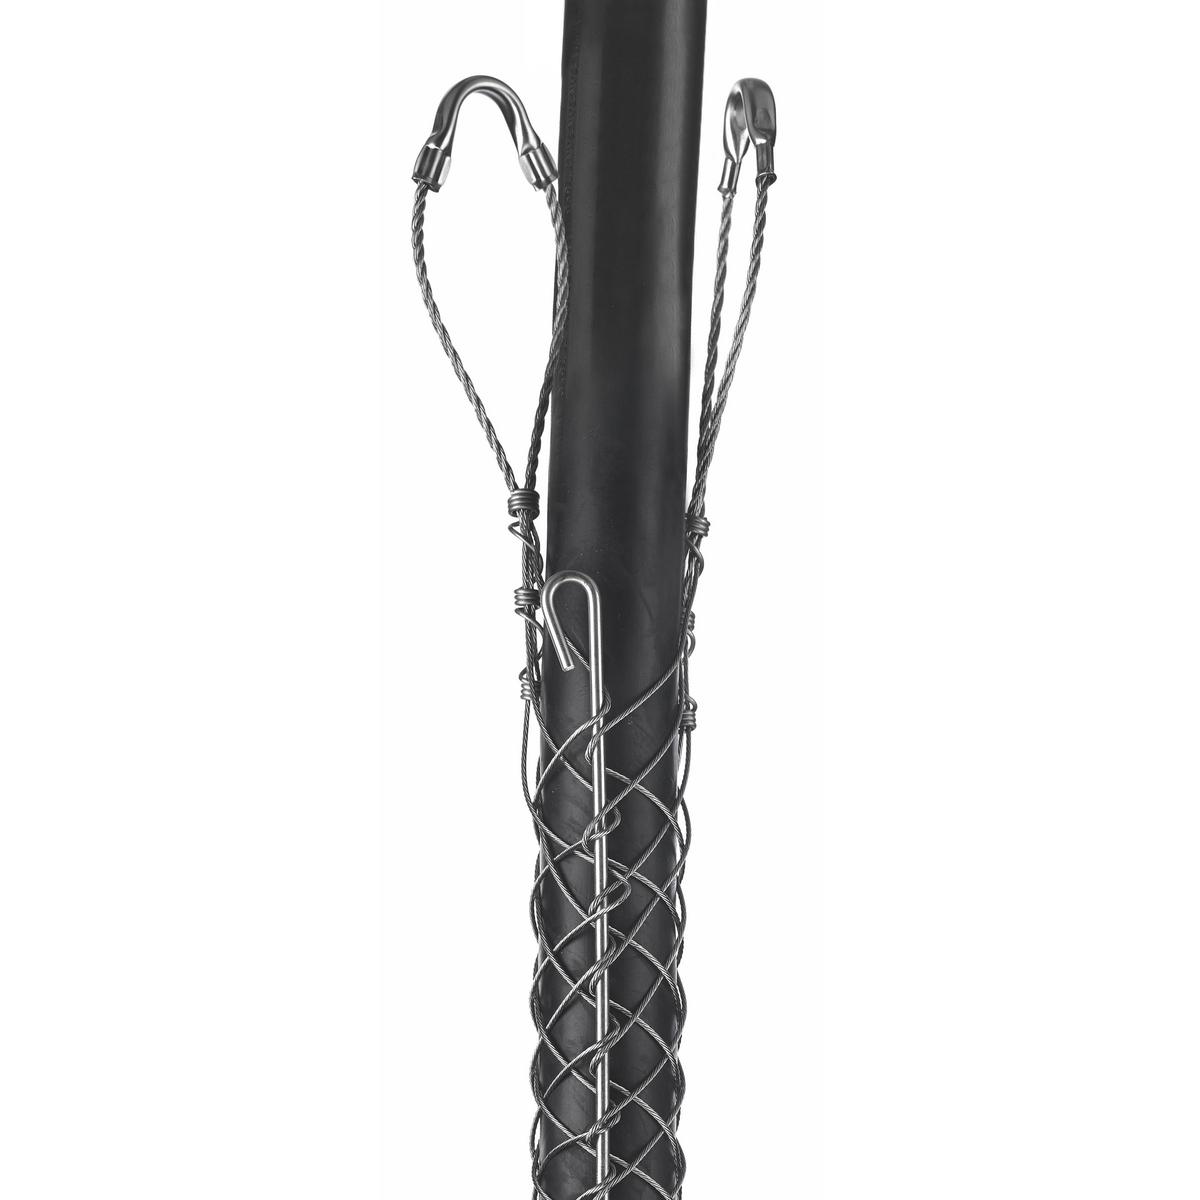 Hubbell 02403002 Support Grips, Double Eye, Single Weave, Split Mesh, Rod Closing, Stainless Steel, 0.63-0.74"  ; Double eye ; Strand equalizers position wires for equal loading throughout grip length ; Eye assemblies provide eye reinforcement at support hardware ; Split 